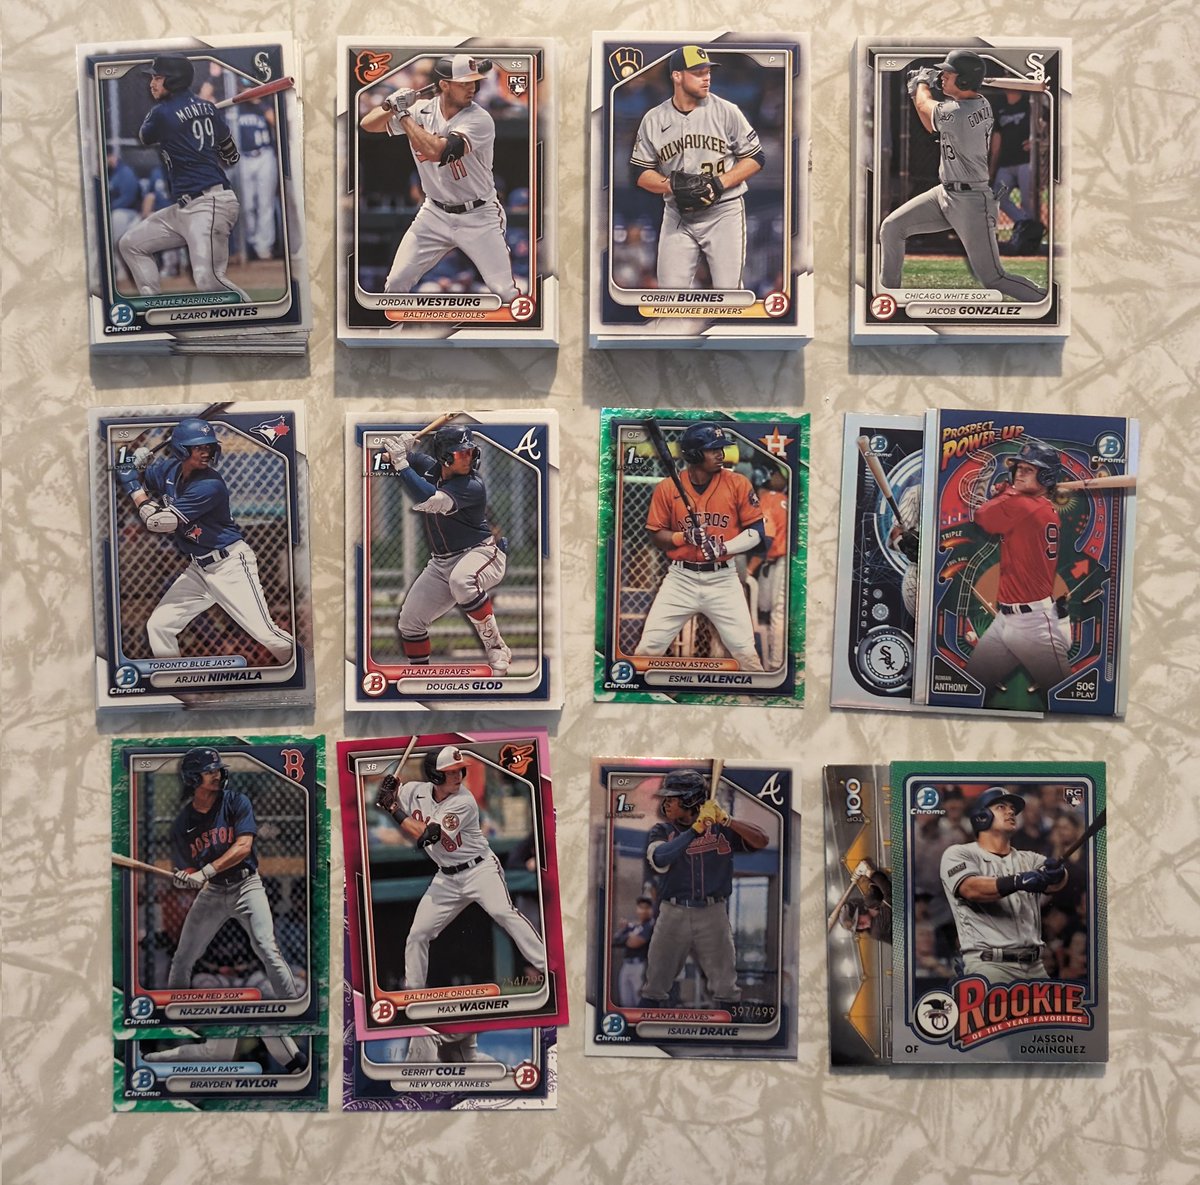 Too many Bowman W's on the timeline. Post your L's! Here's mine! #thehobby #hobbyfam

3 blasters: